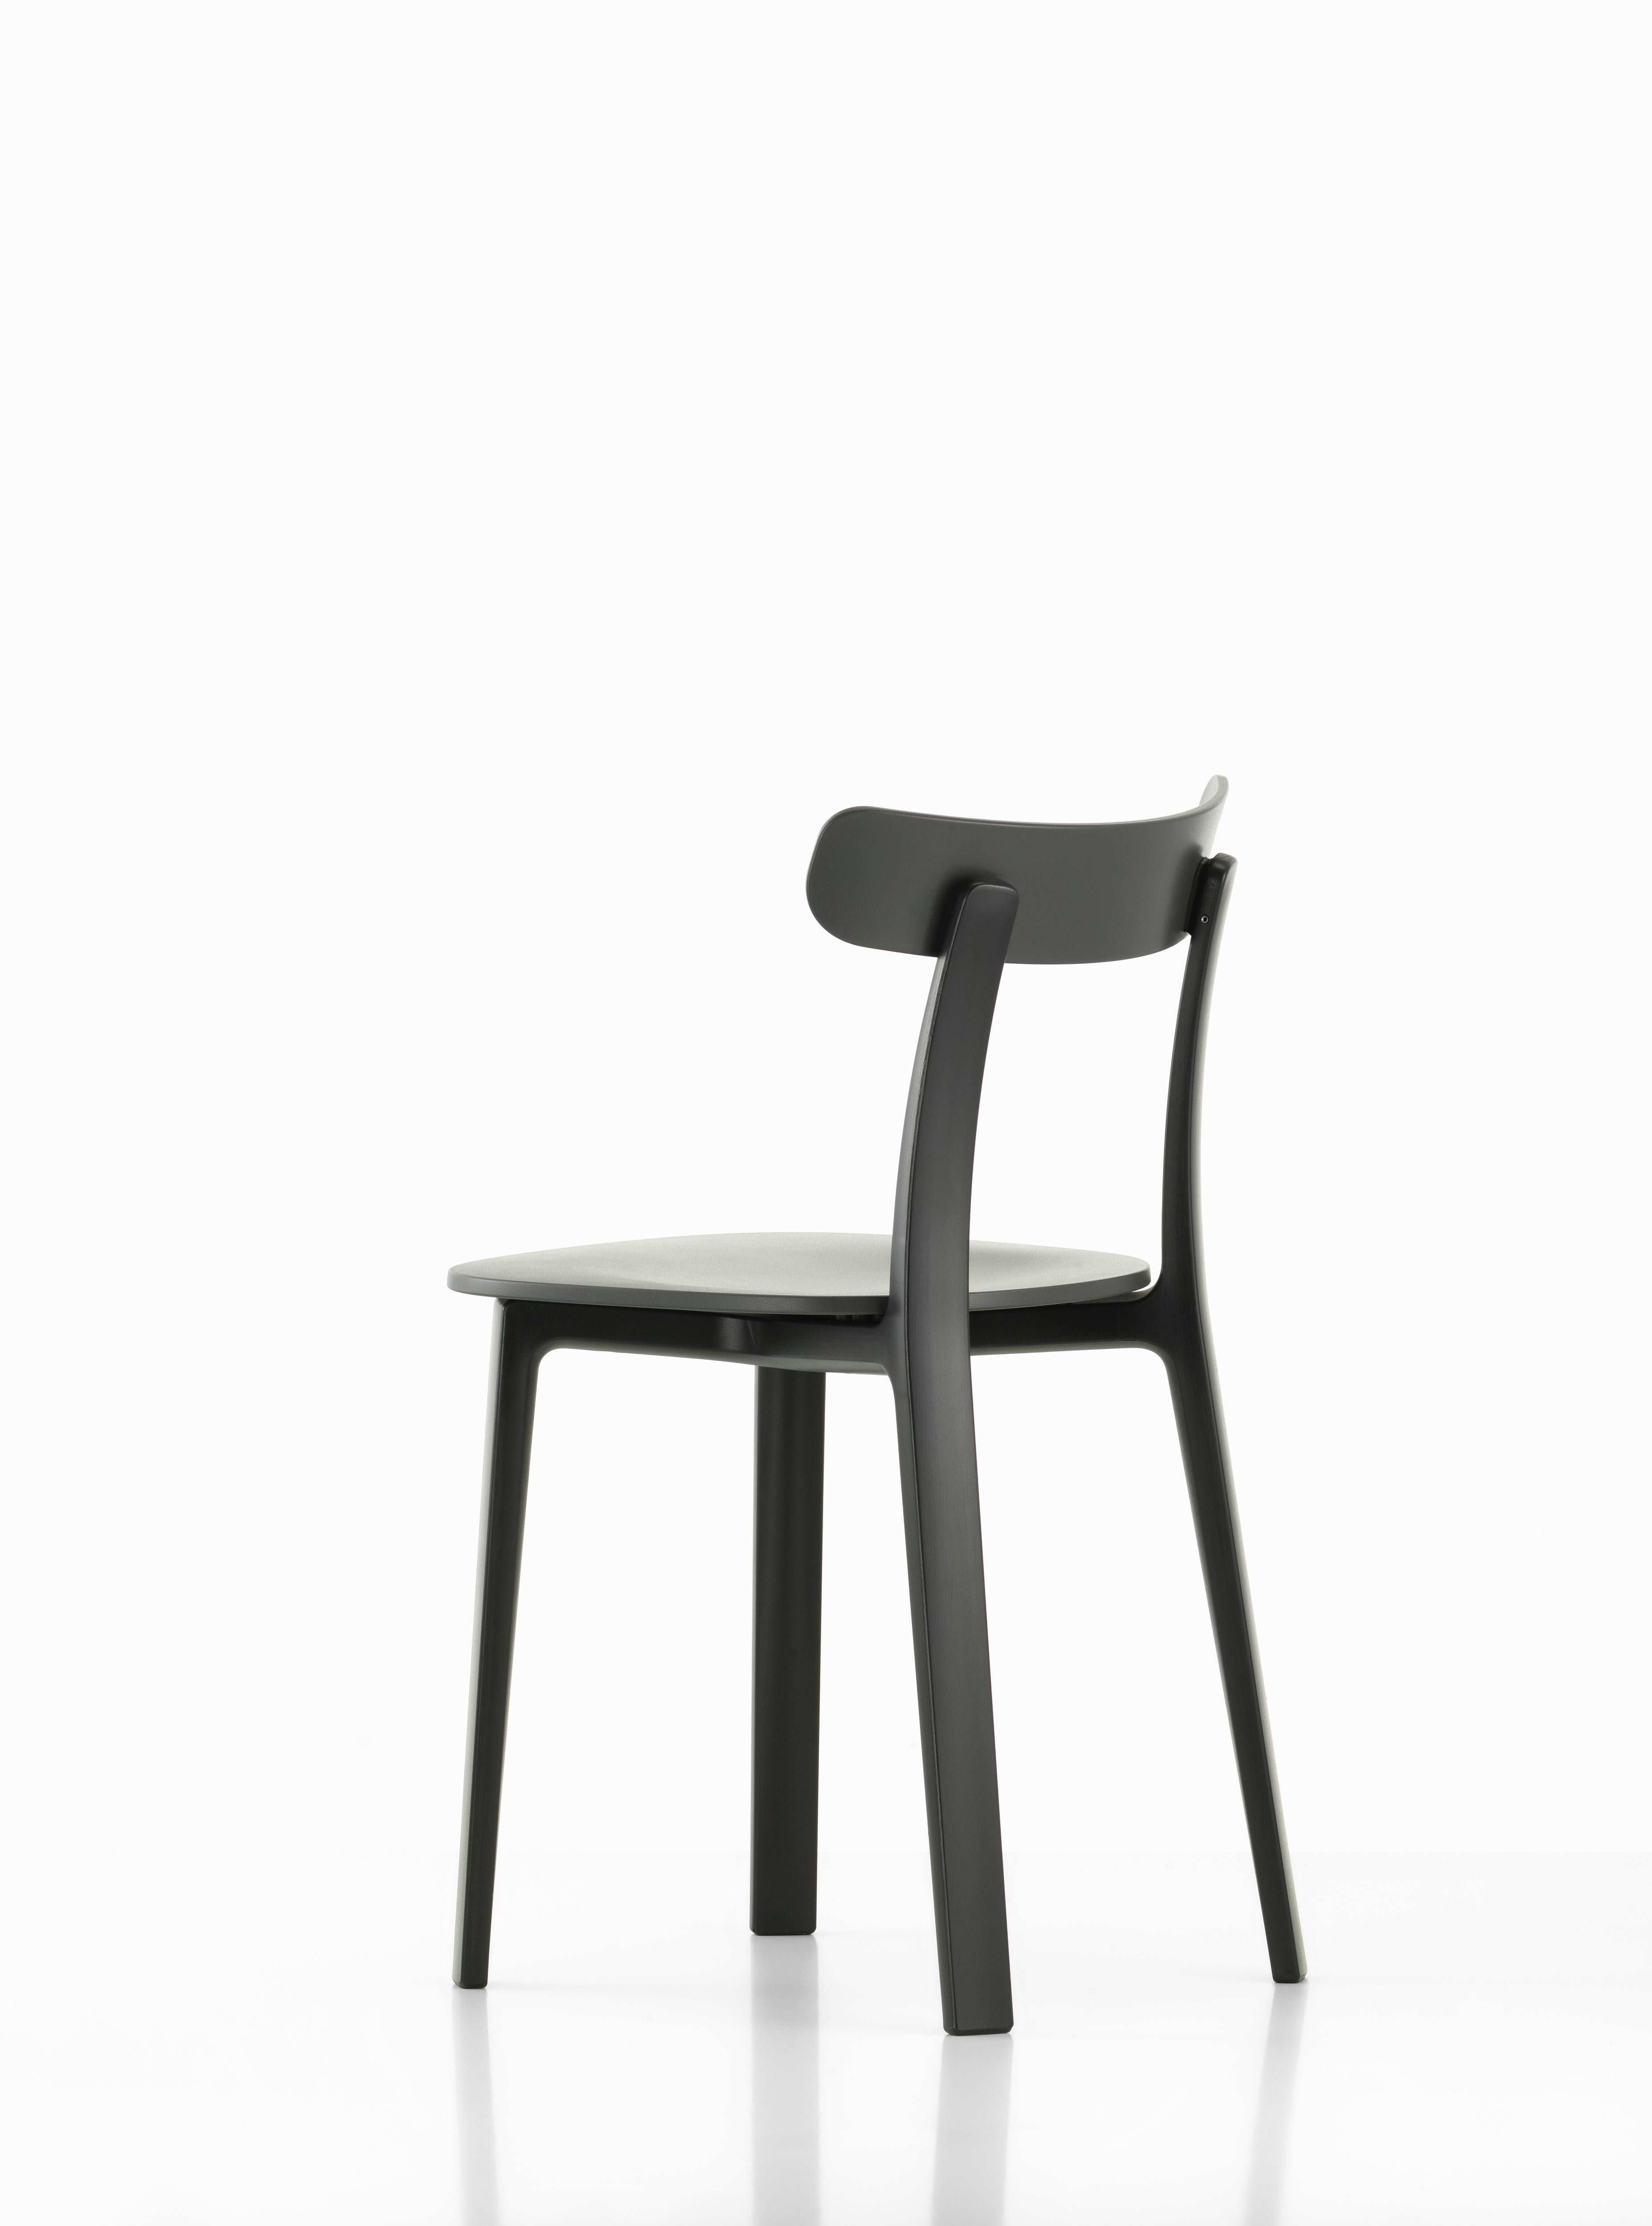 Swiss Vitra All Plastic Chair in Graphite Grey Two Tone by Jasper Morrison For Sale